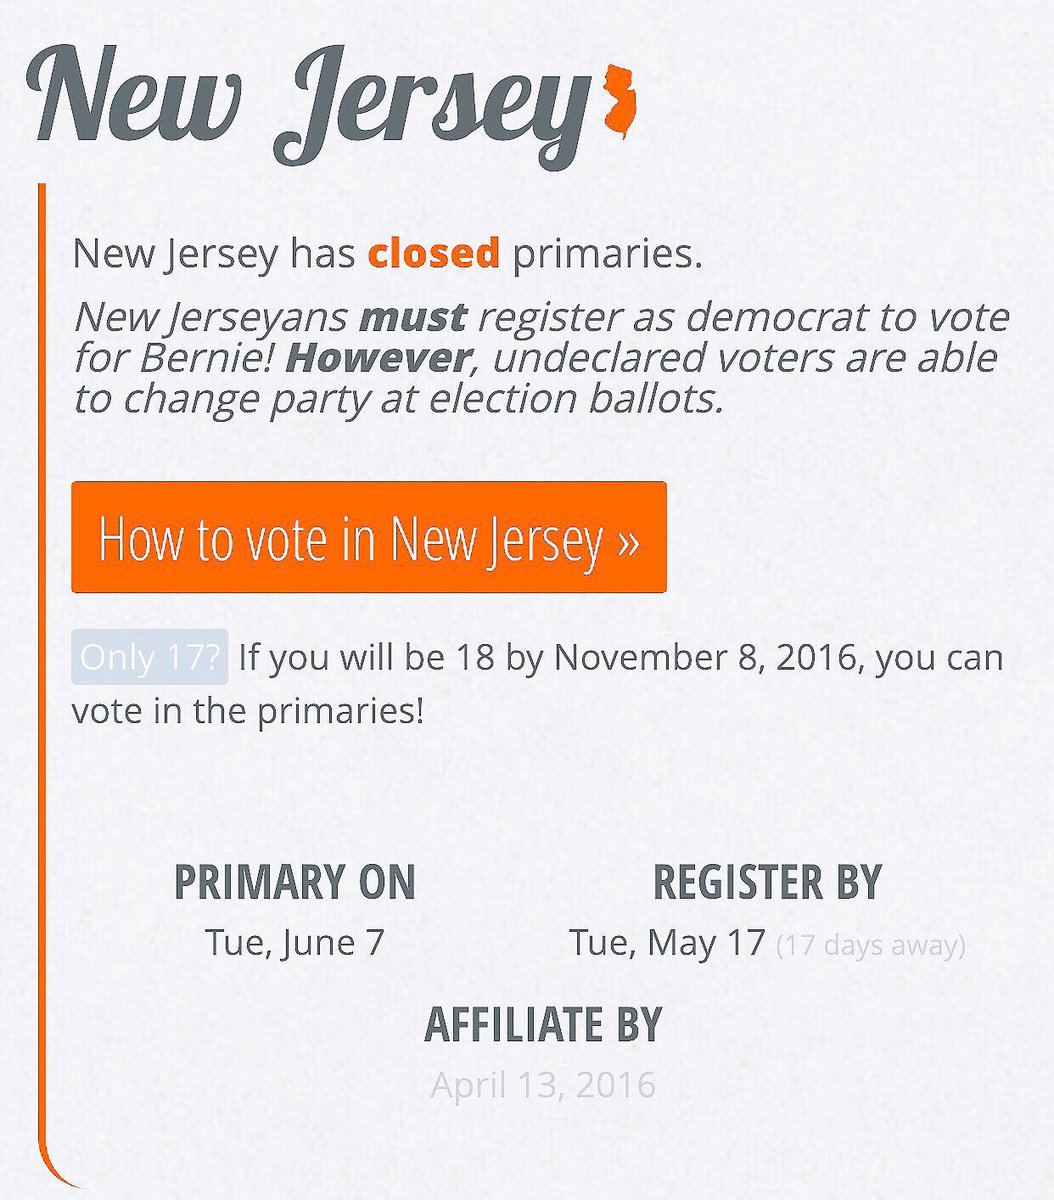 RT @ntrsfrml: #NewJersey Voters! 

You Must be Registered as a #Democrat to vote for #Bernie

https://t.co/drXeDW3Jep

#Newark https://t.co…